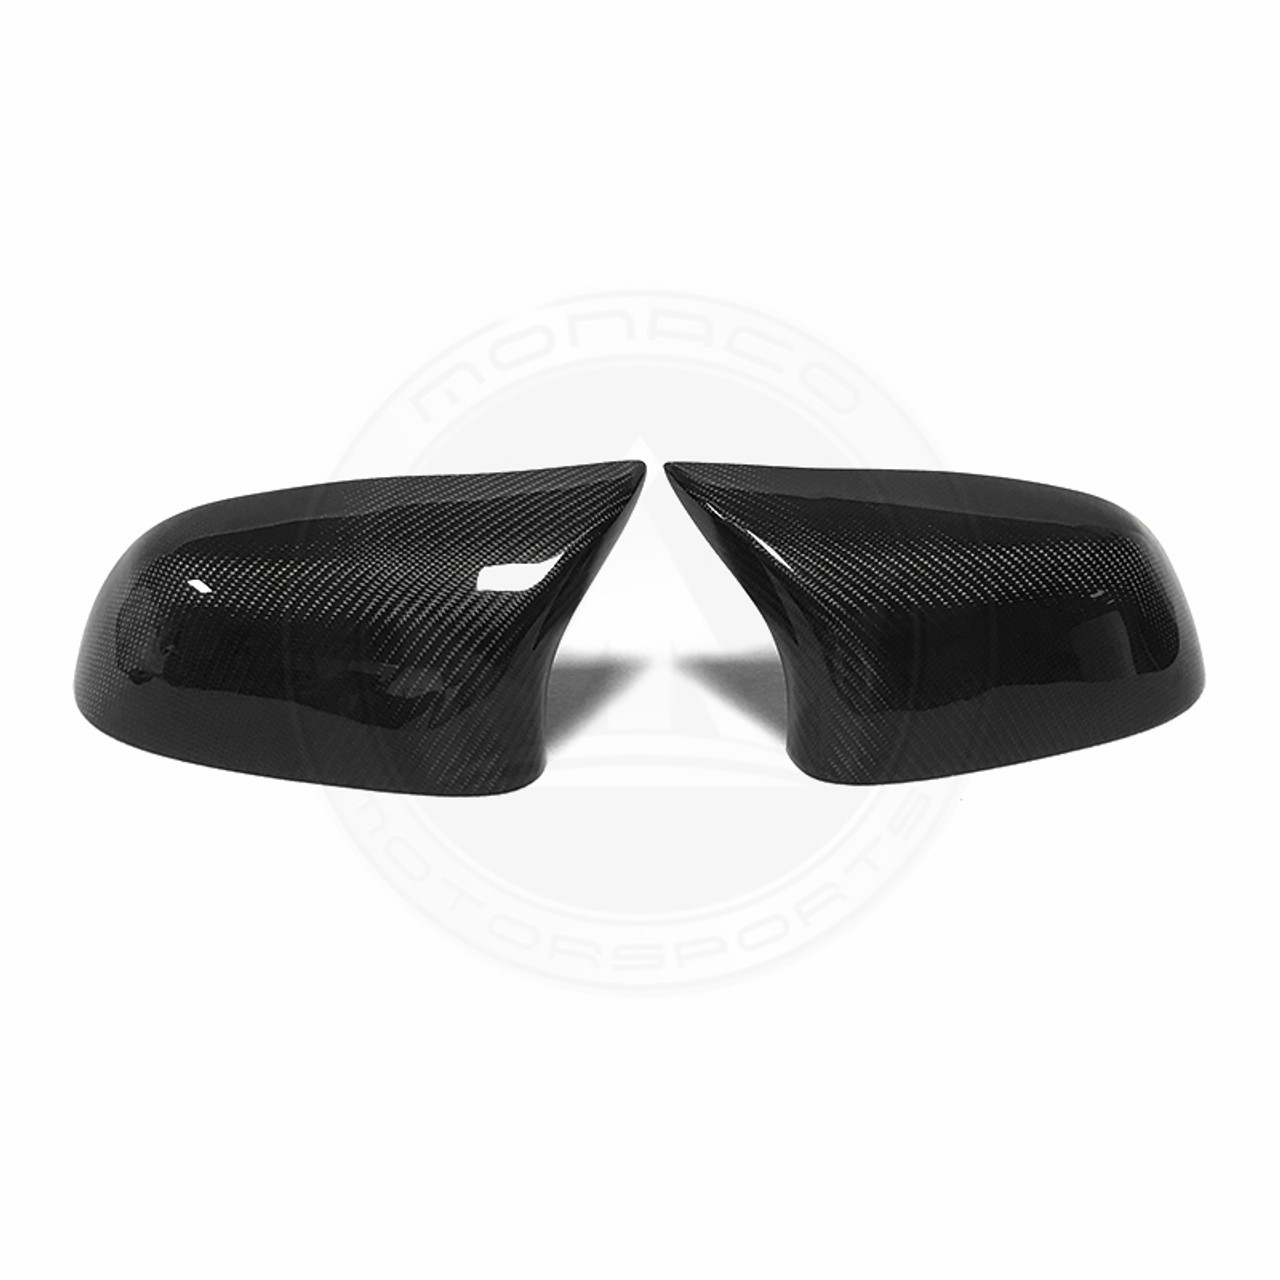 BMW X5 u0026 X6 (F15/F16) Carbon Fiber M Style Mirror Cover Replacements